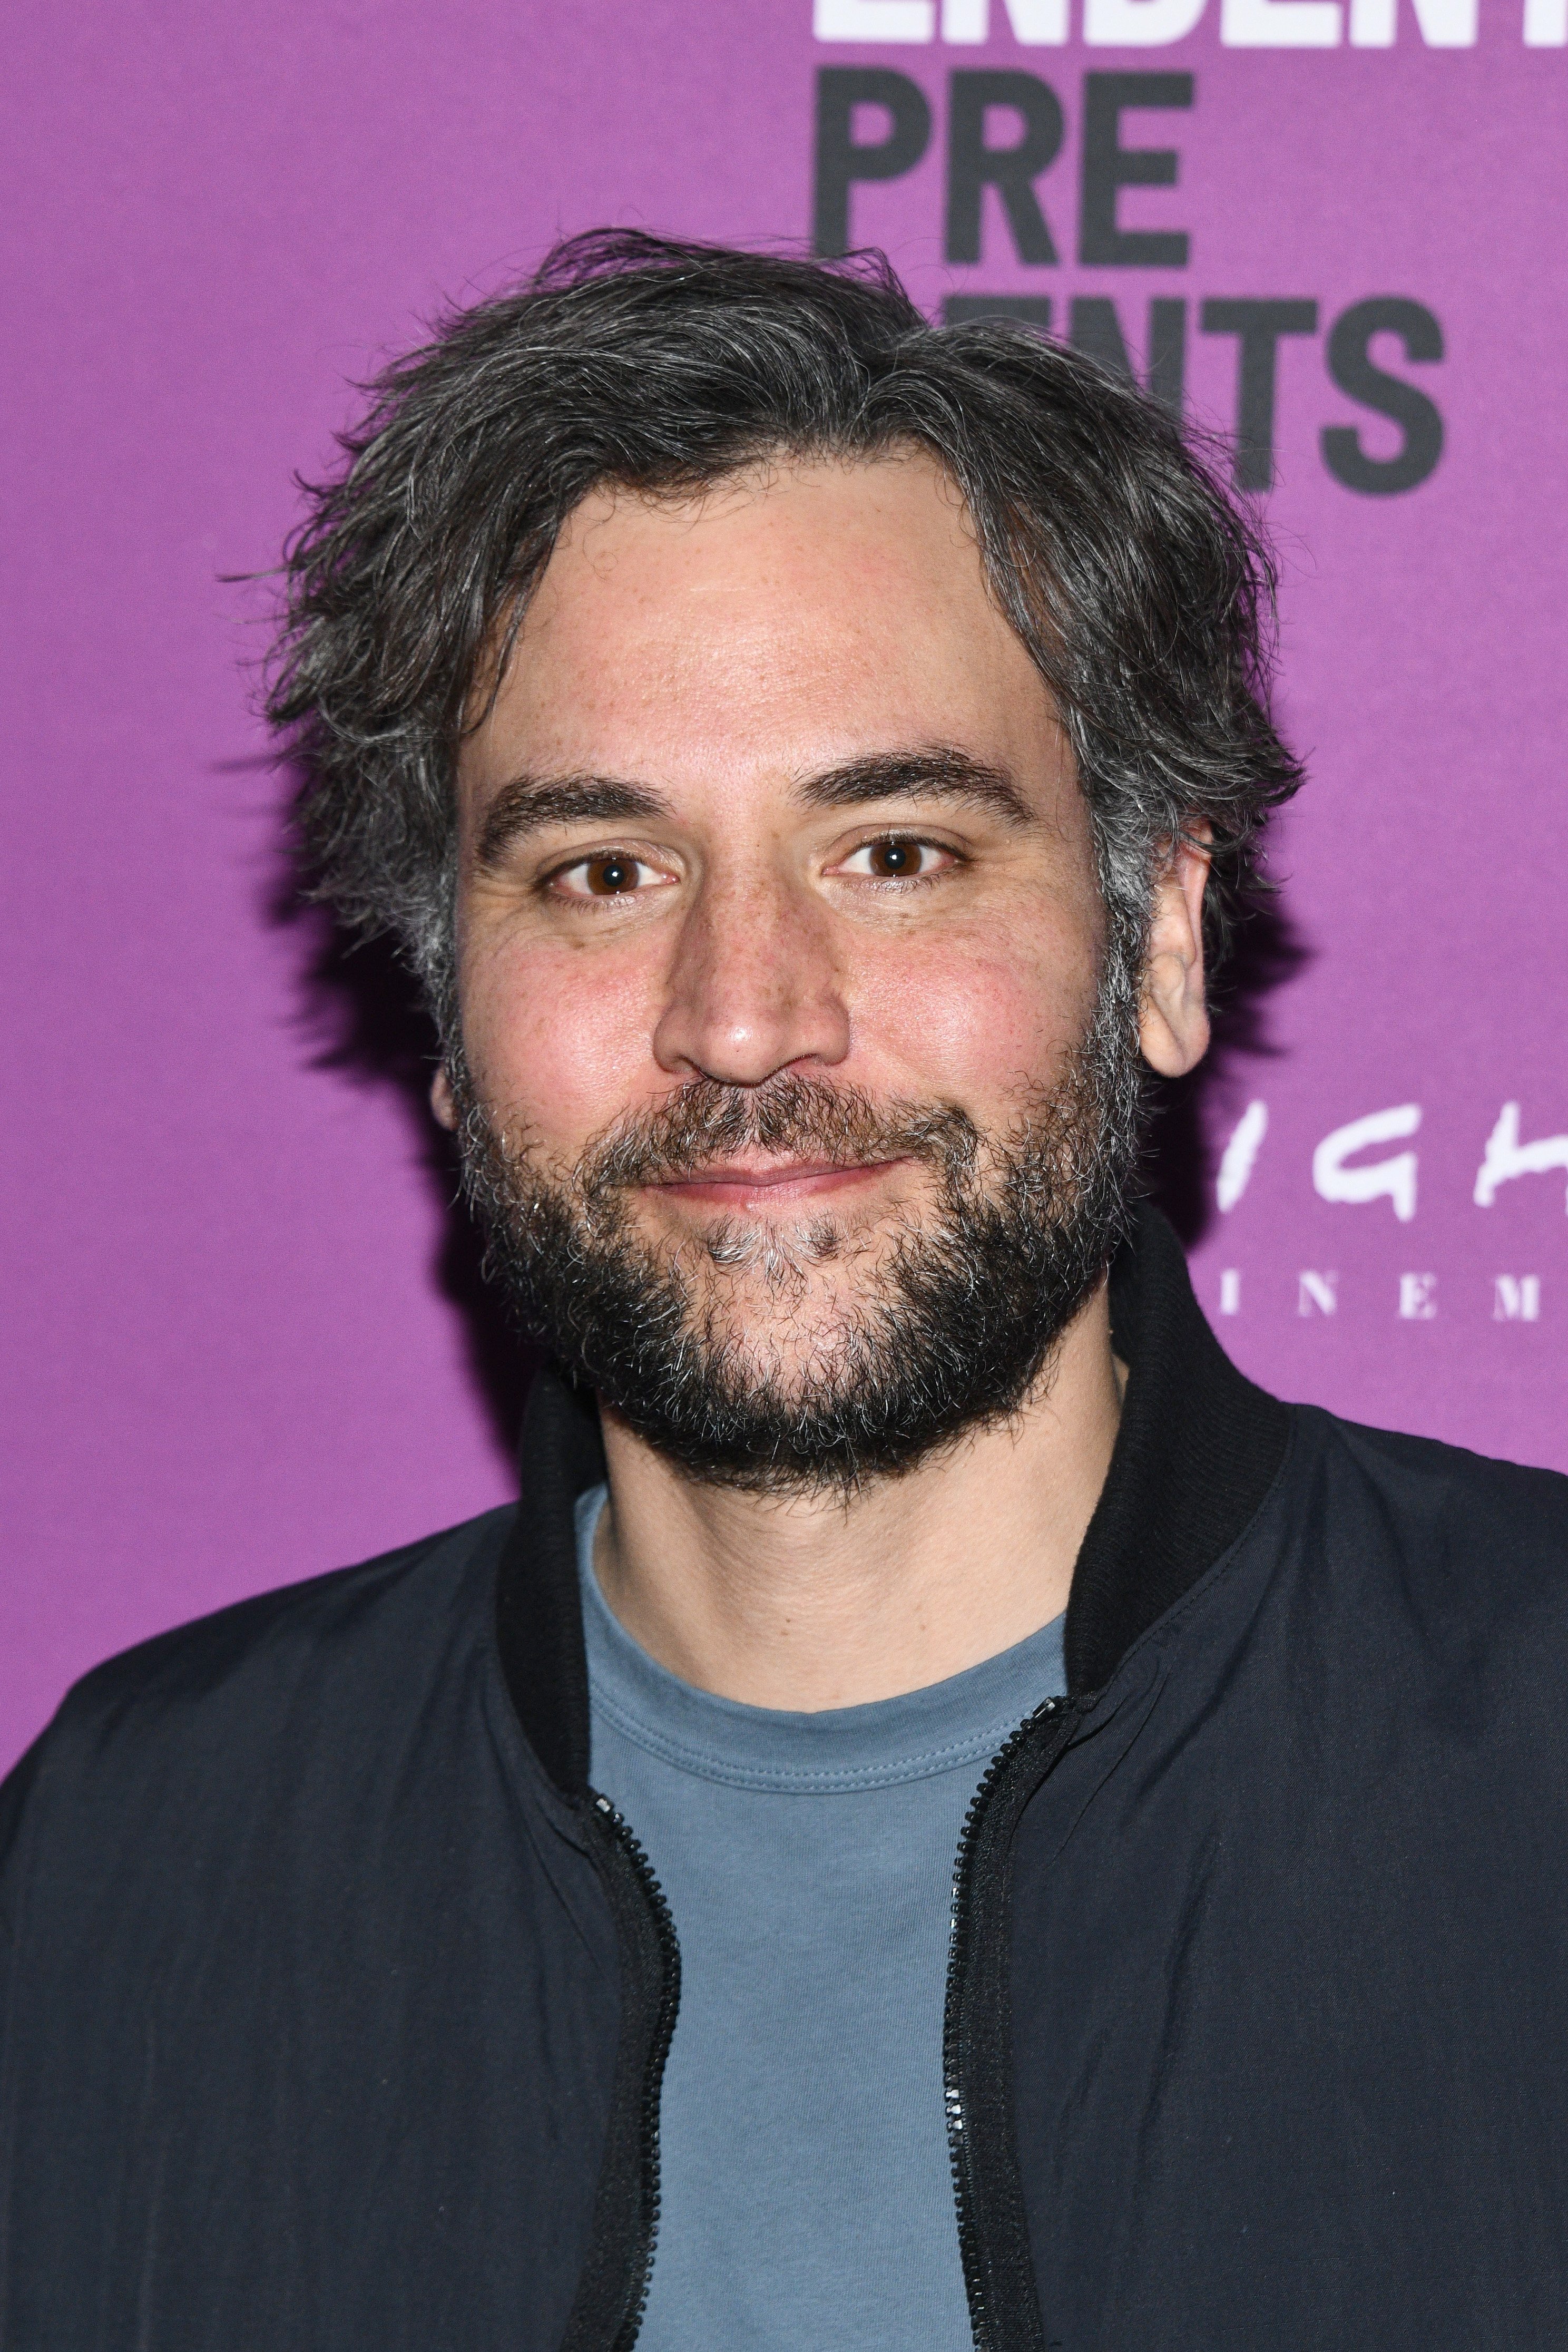 Josh Radnor at the screening of "Hunters" on February 20, 2020, in California. | Source: Getty Images